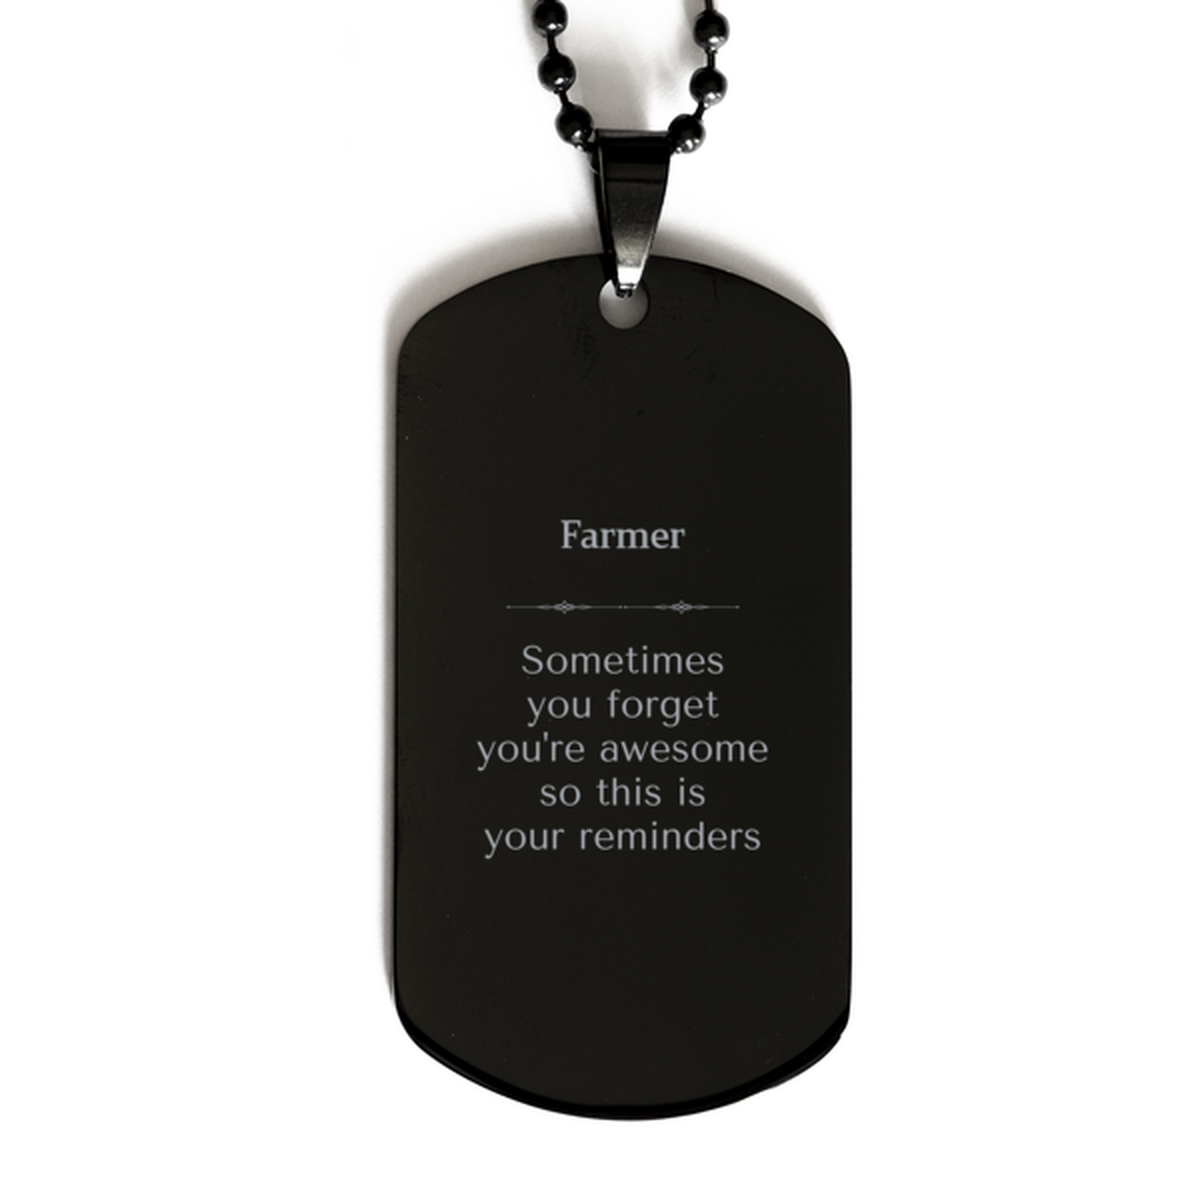 Sentimental Farmer Black Dog Tag, Farmer Sometimes you forget you're awesome so this is your reminders, Graduation Christmas Birthday Gifts for Farmer, Men, Women, Coworkers